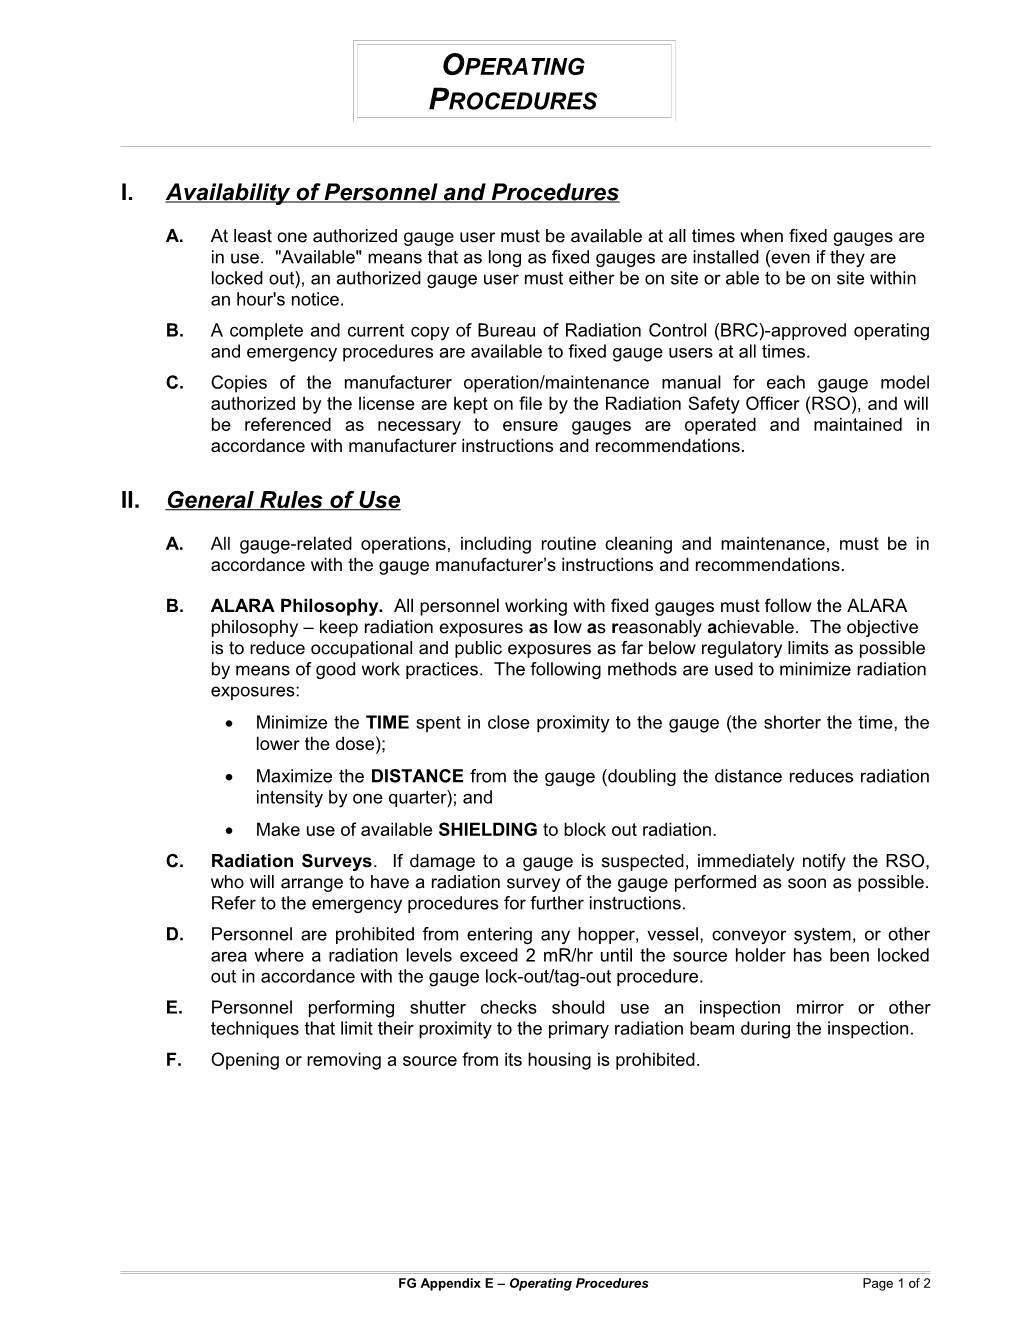 I.Availability of Personnel and Procedures